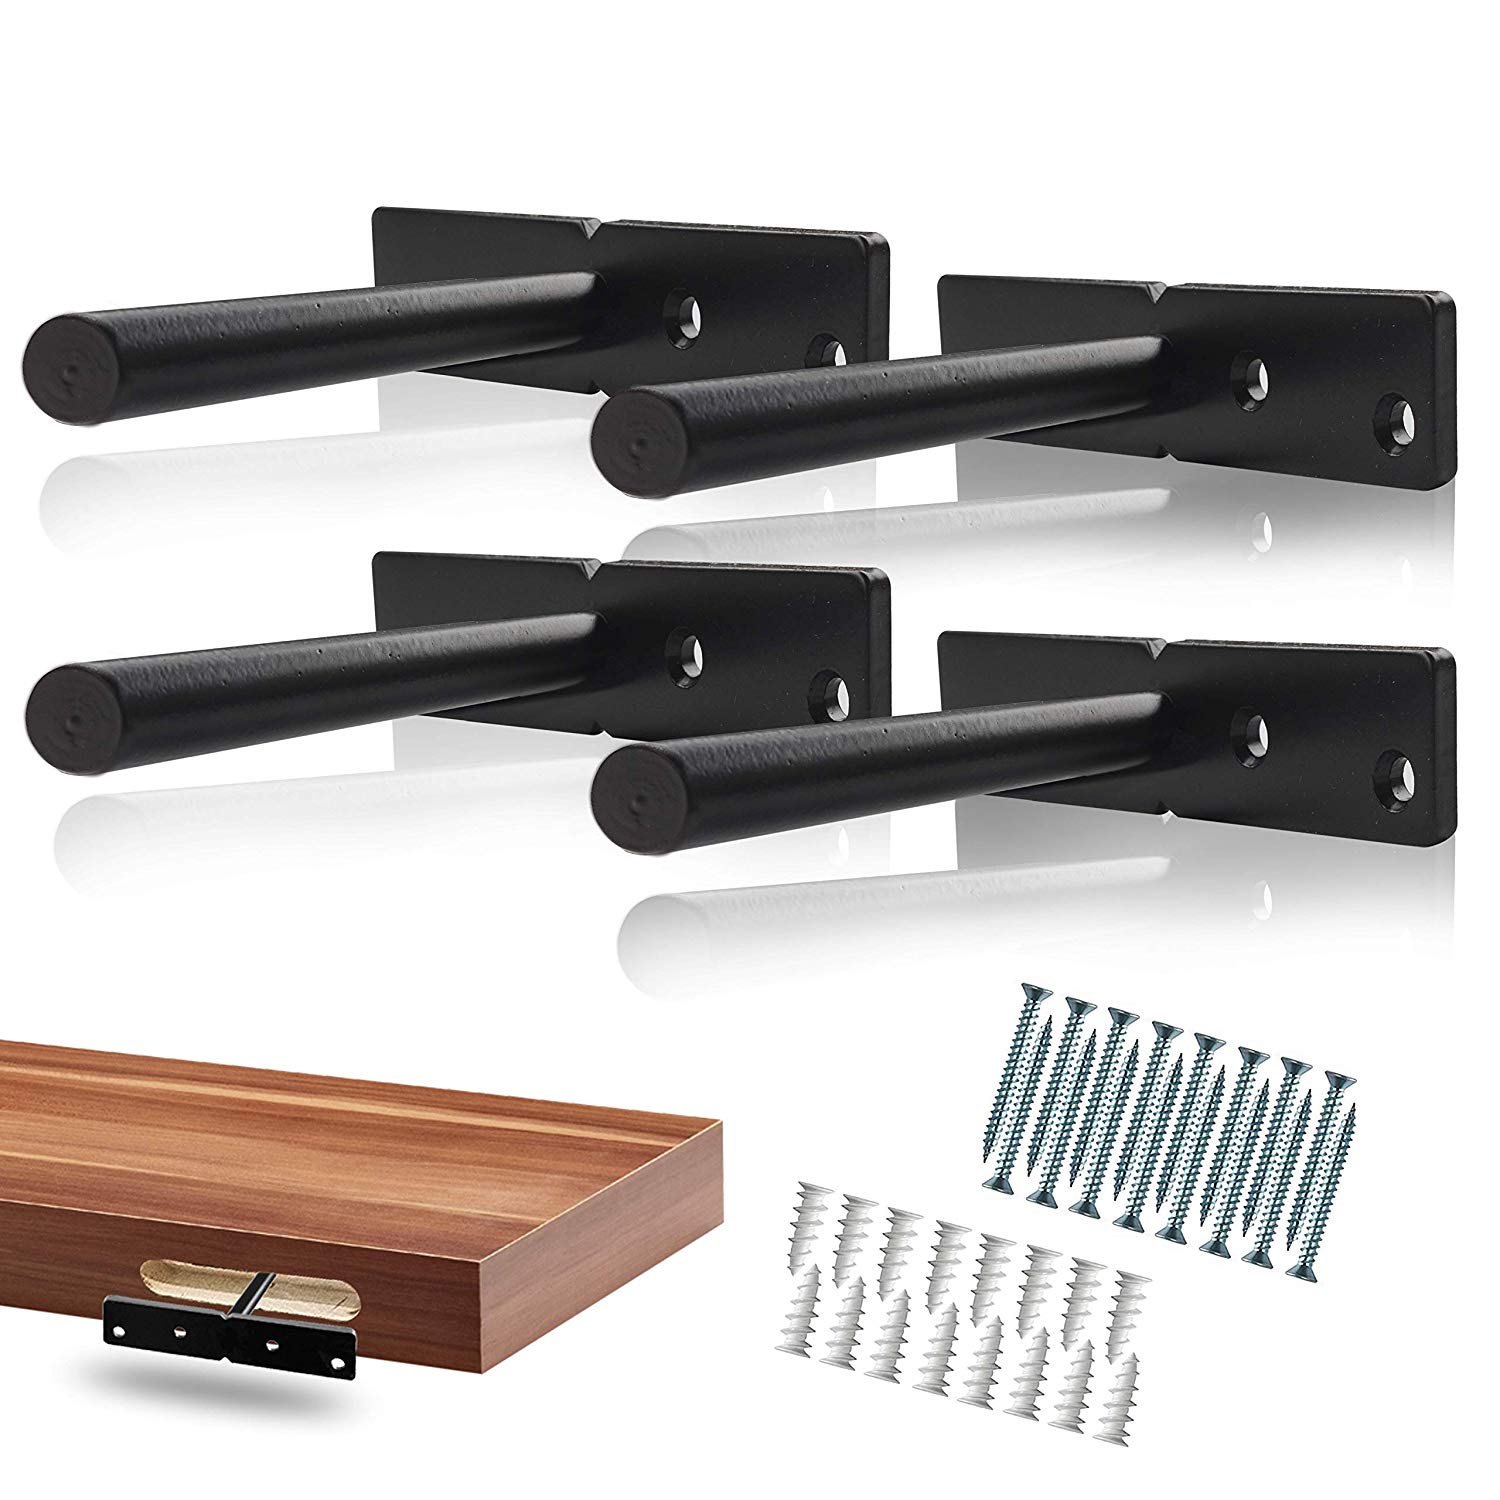 floating shelf bracket black heavy duty inch pack fixing kit invisible blind hidden steel supports for wood screws wall plugs included best space saving persby ikea unit modern